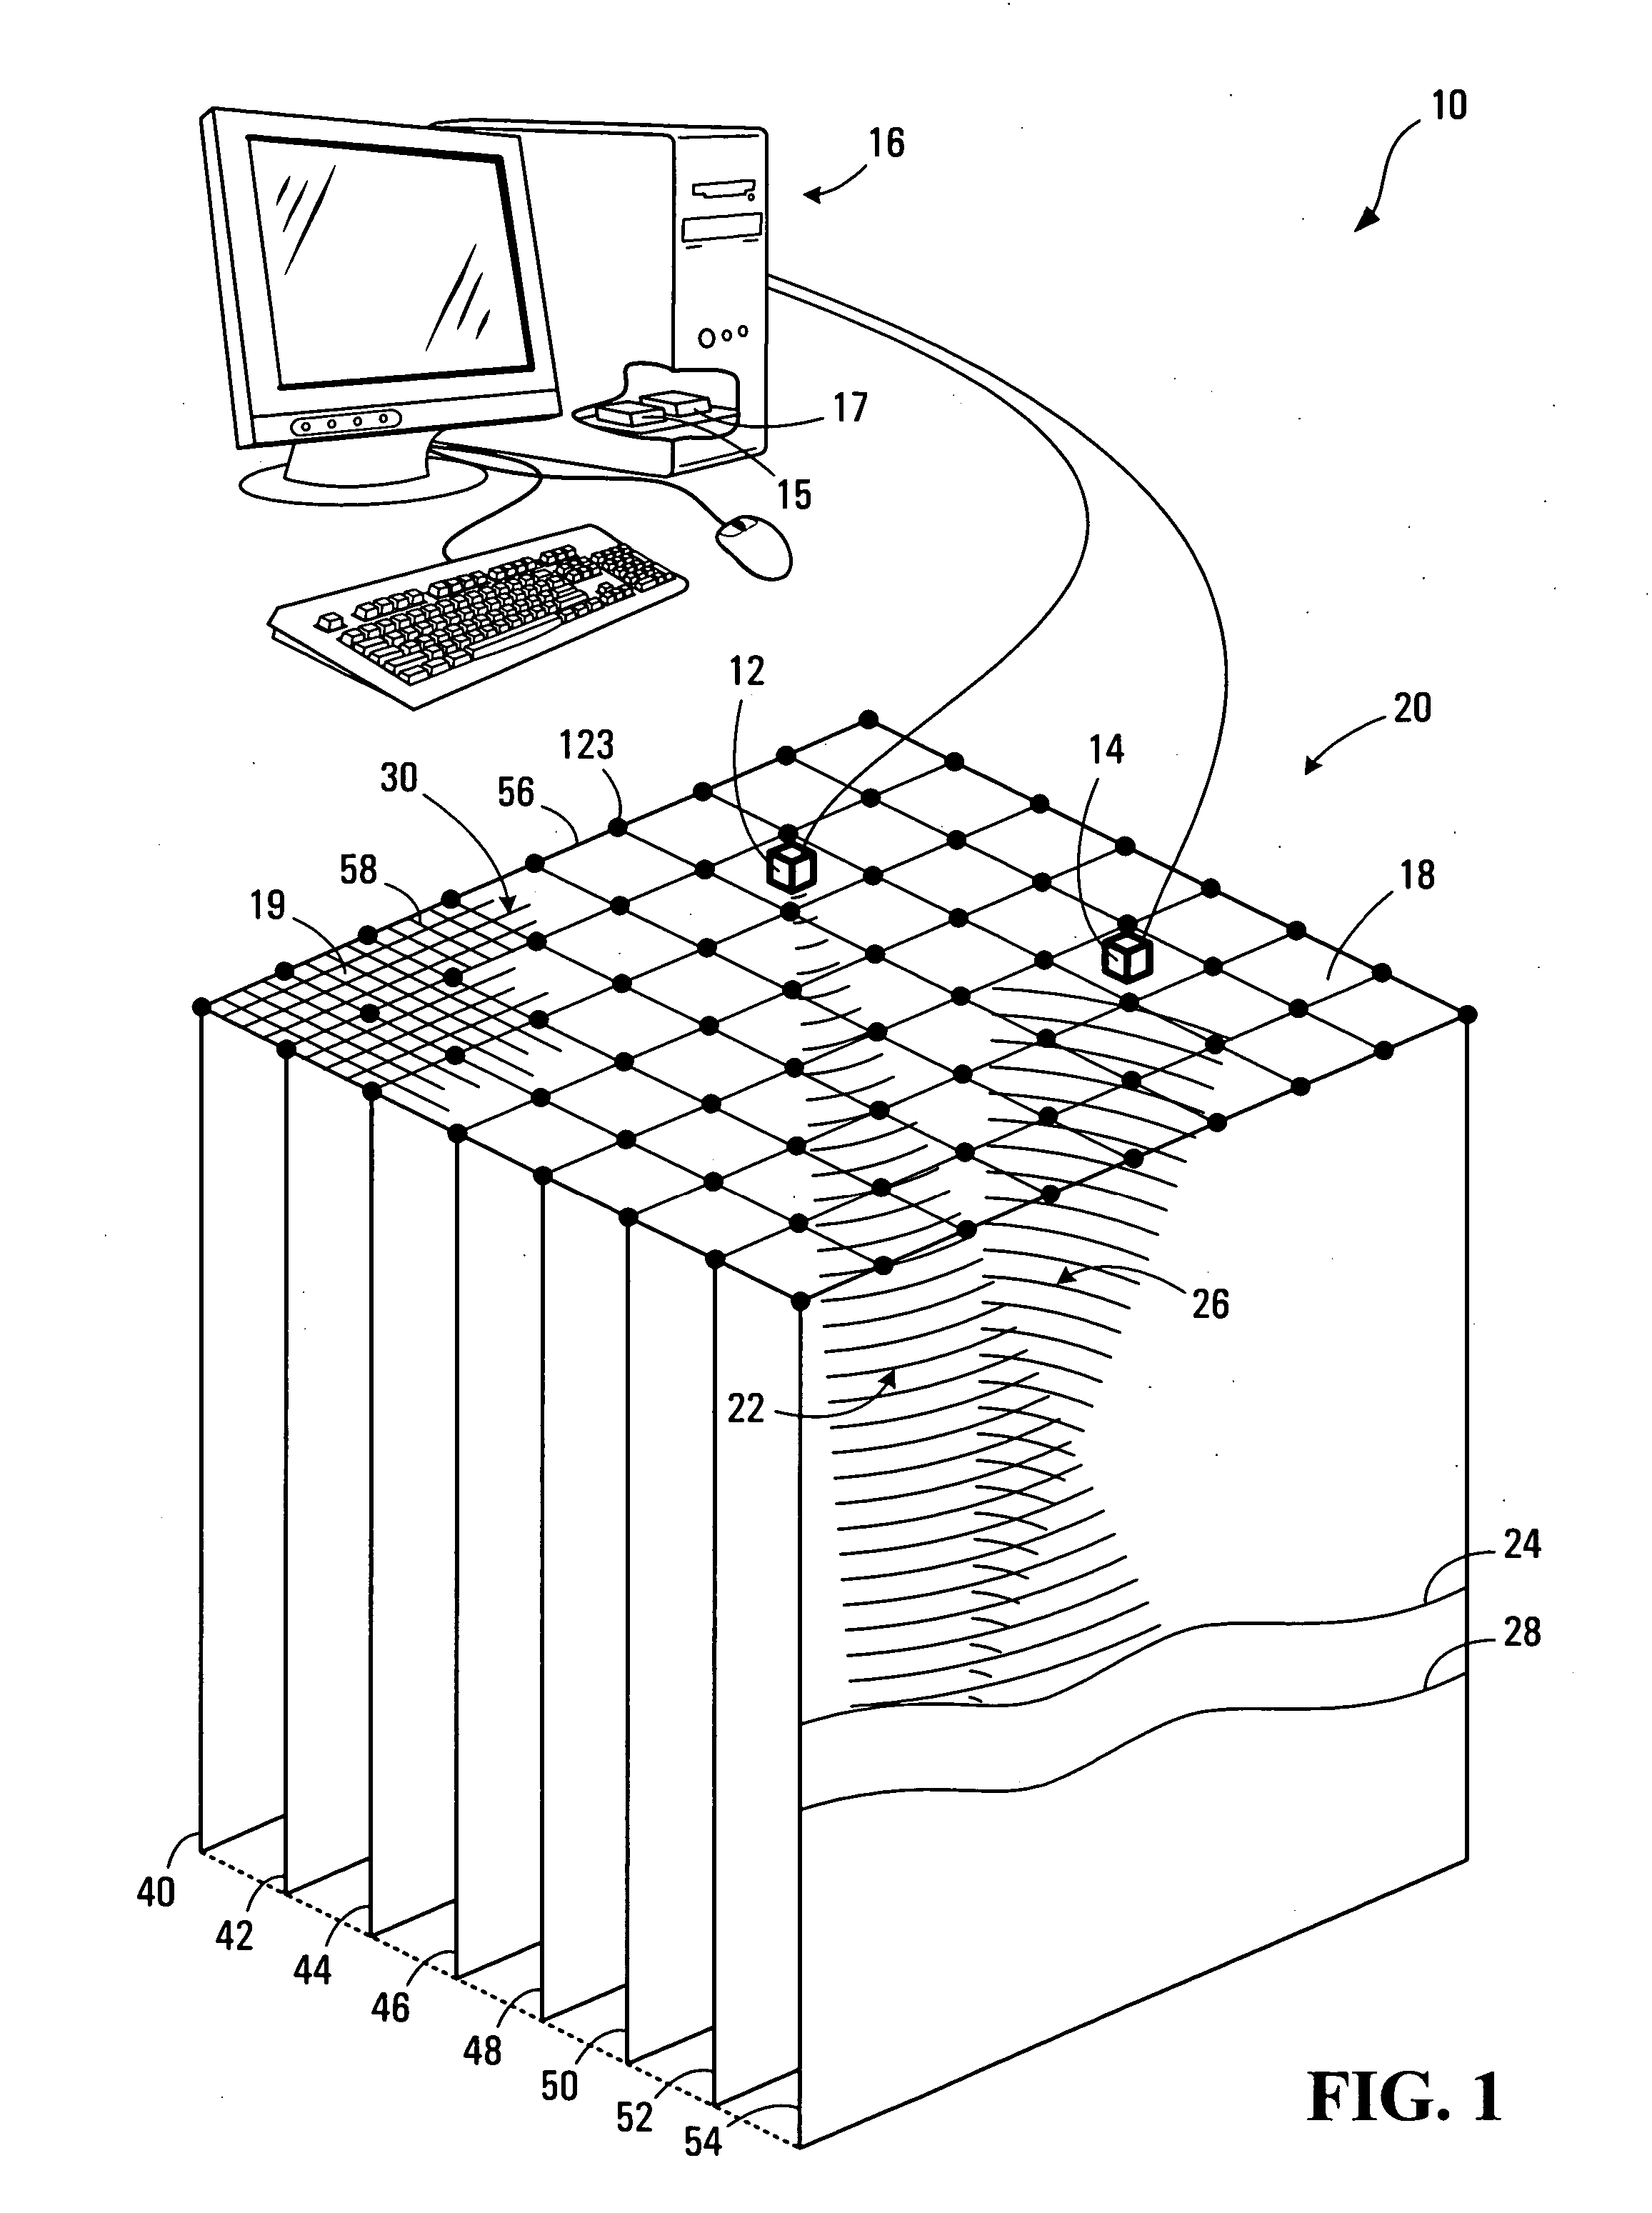 Method, media, and signals for processing seismic data to obtain a velocity field